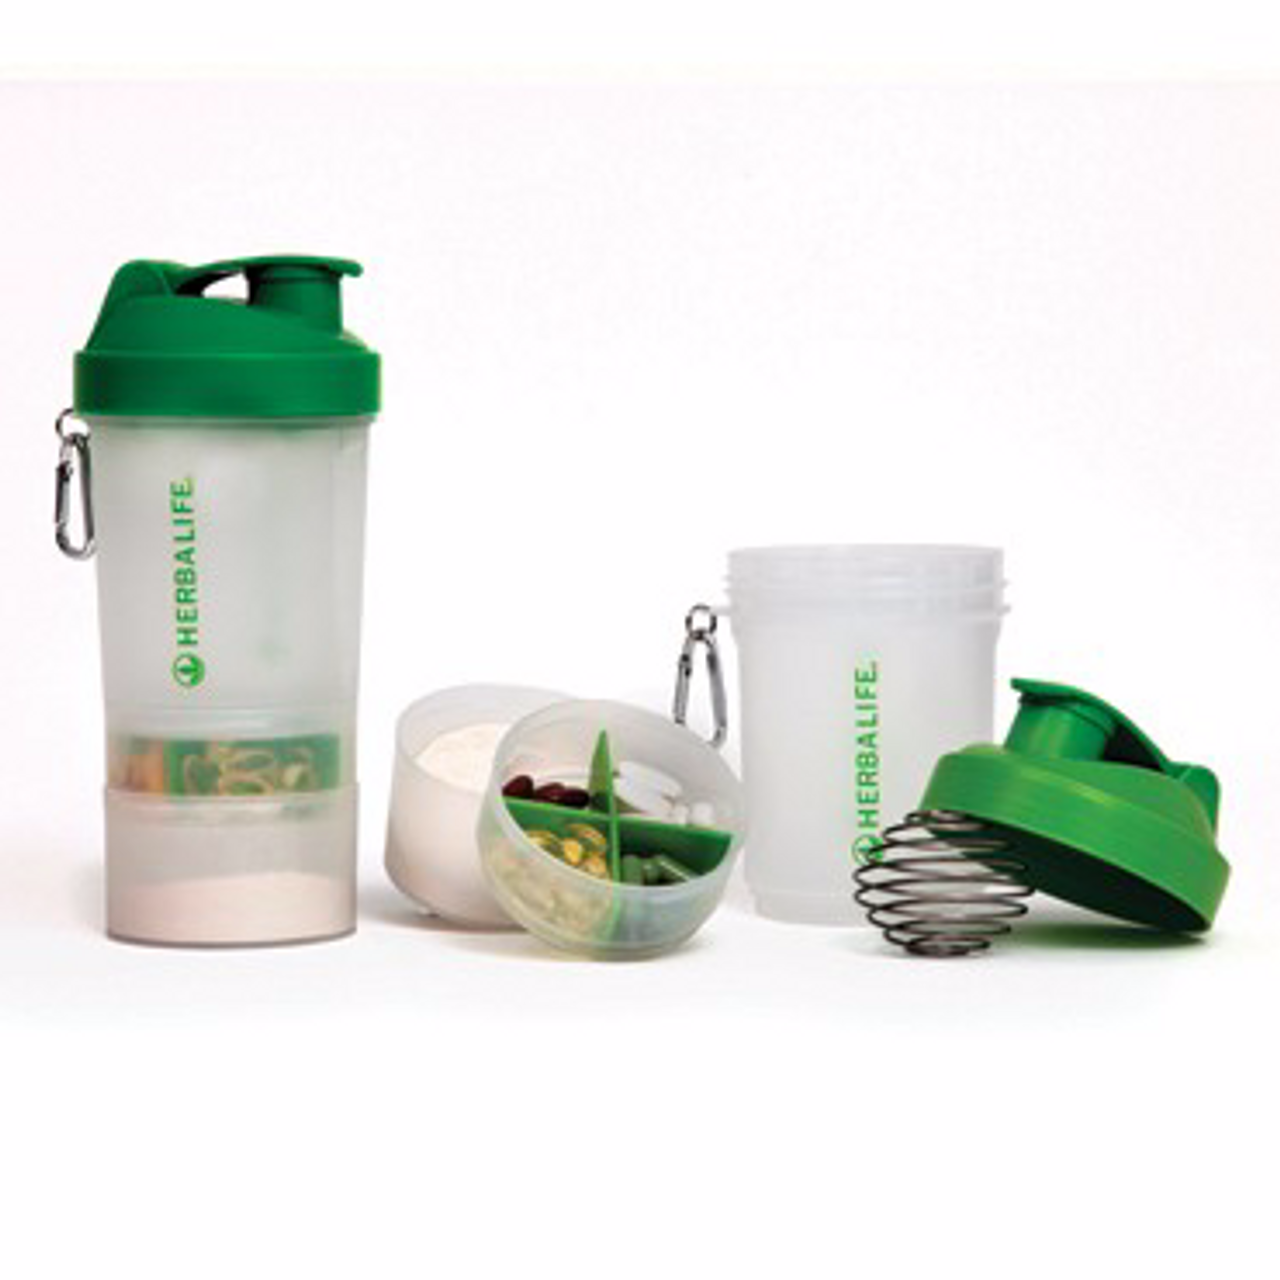 Herbalife Shaker Bottle 13.5-Ounce(400ml) with Blender and Herbalife Spoon  1 pack